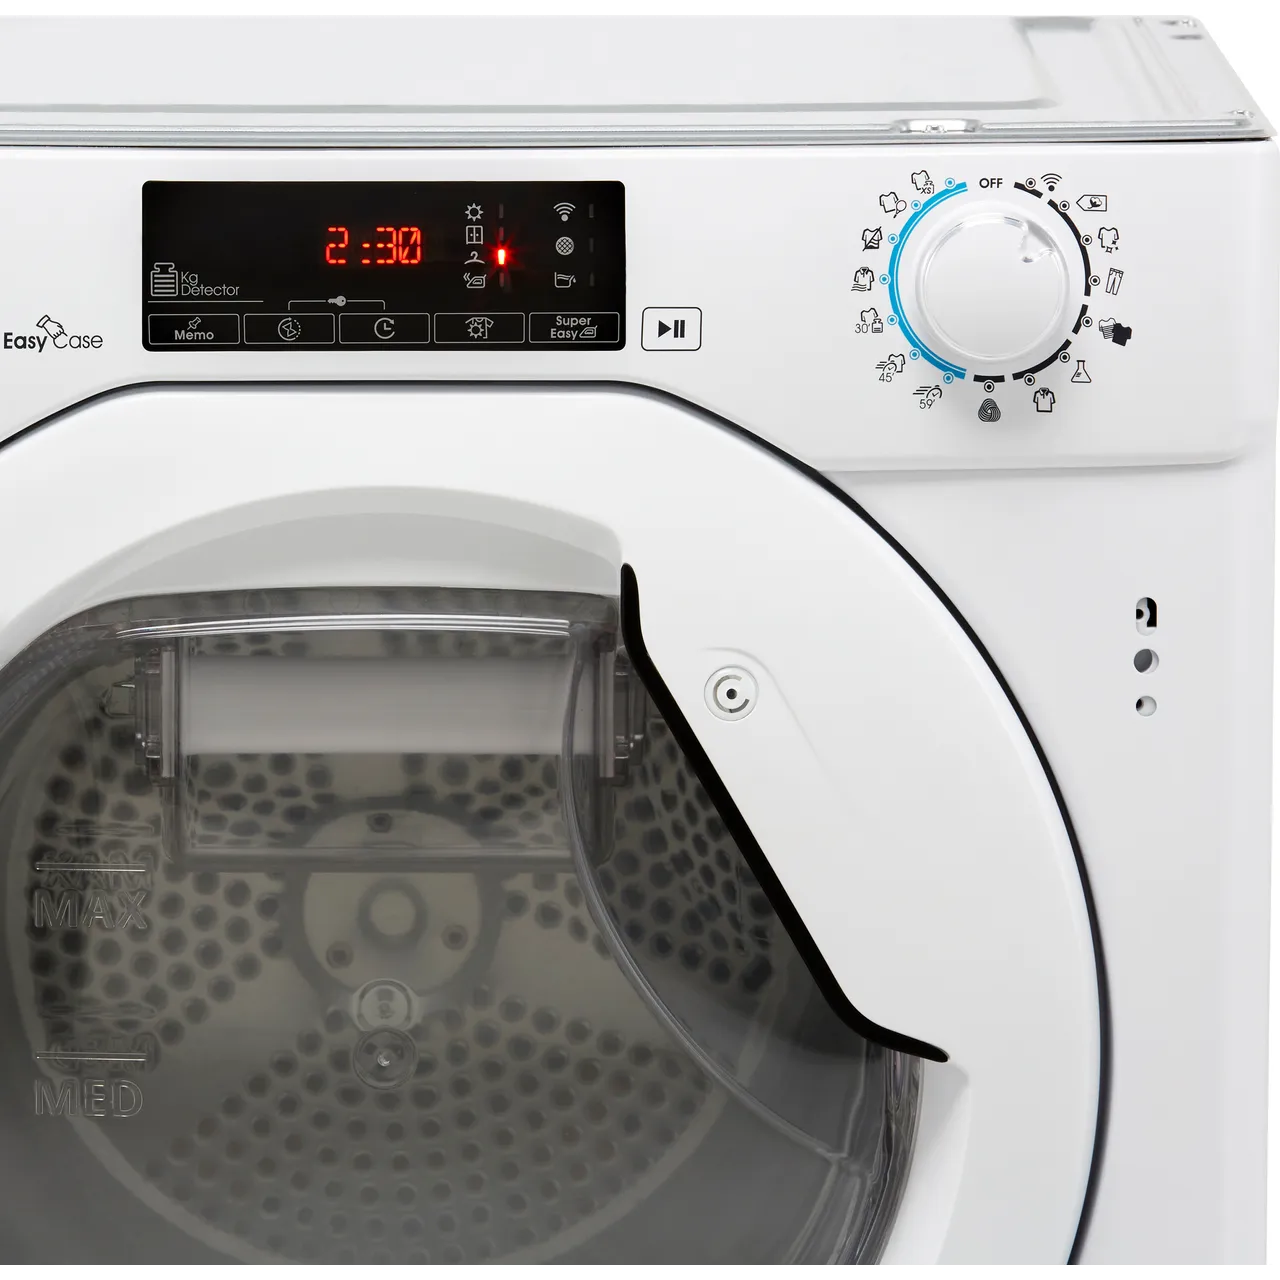 Candy BCTDH7A1TE White Integrated Wifi Connected 7Kg Heat Pump Tumble Dryer 0156